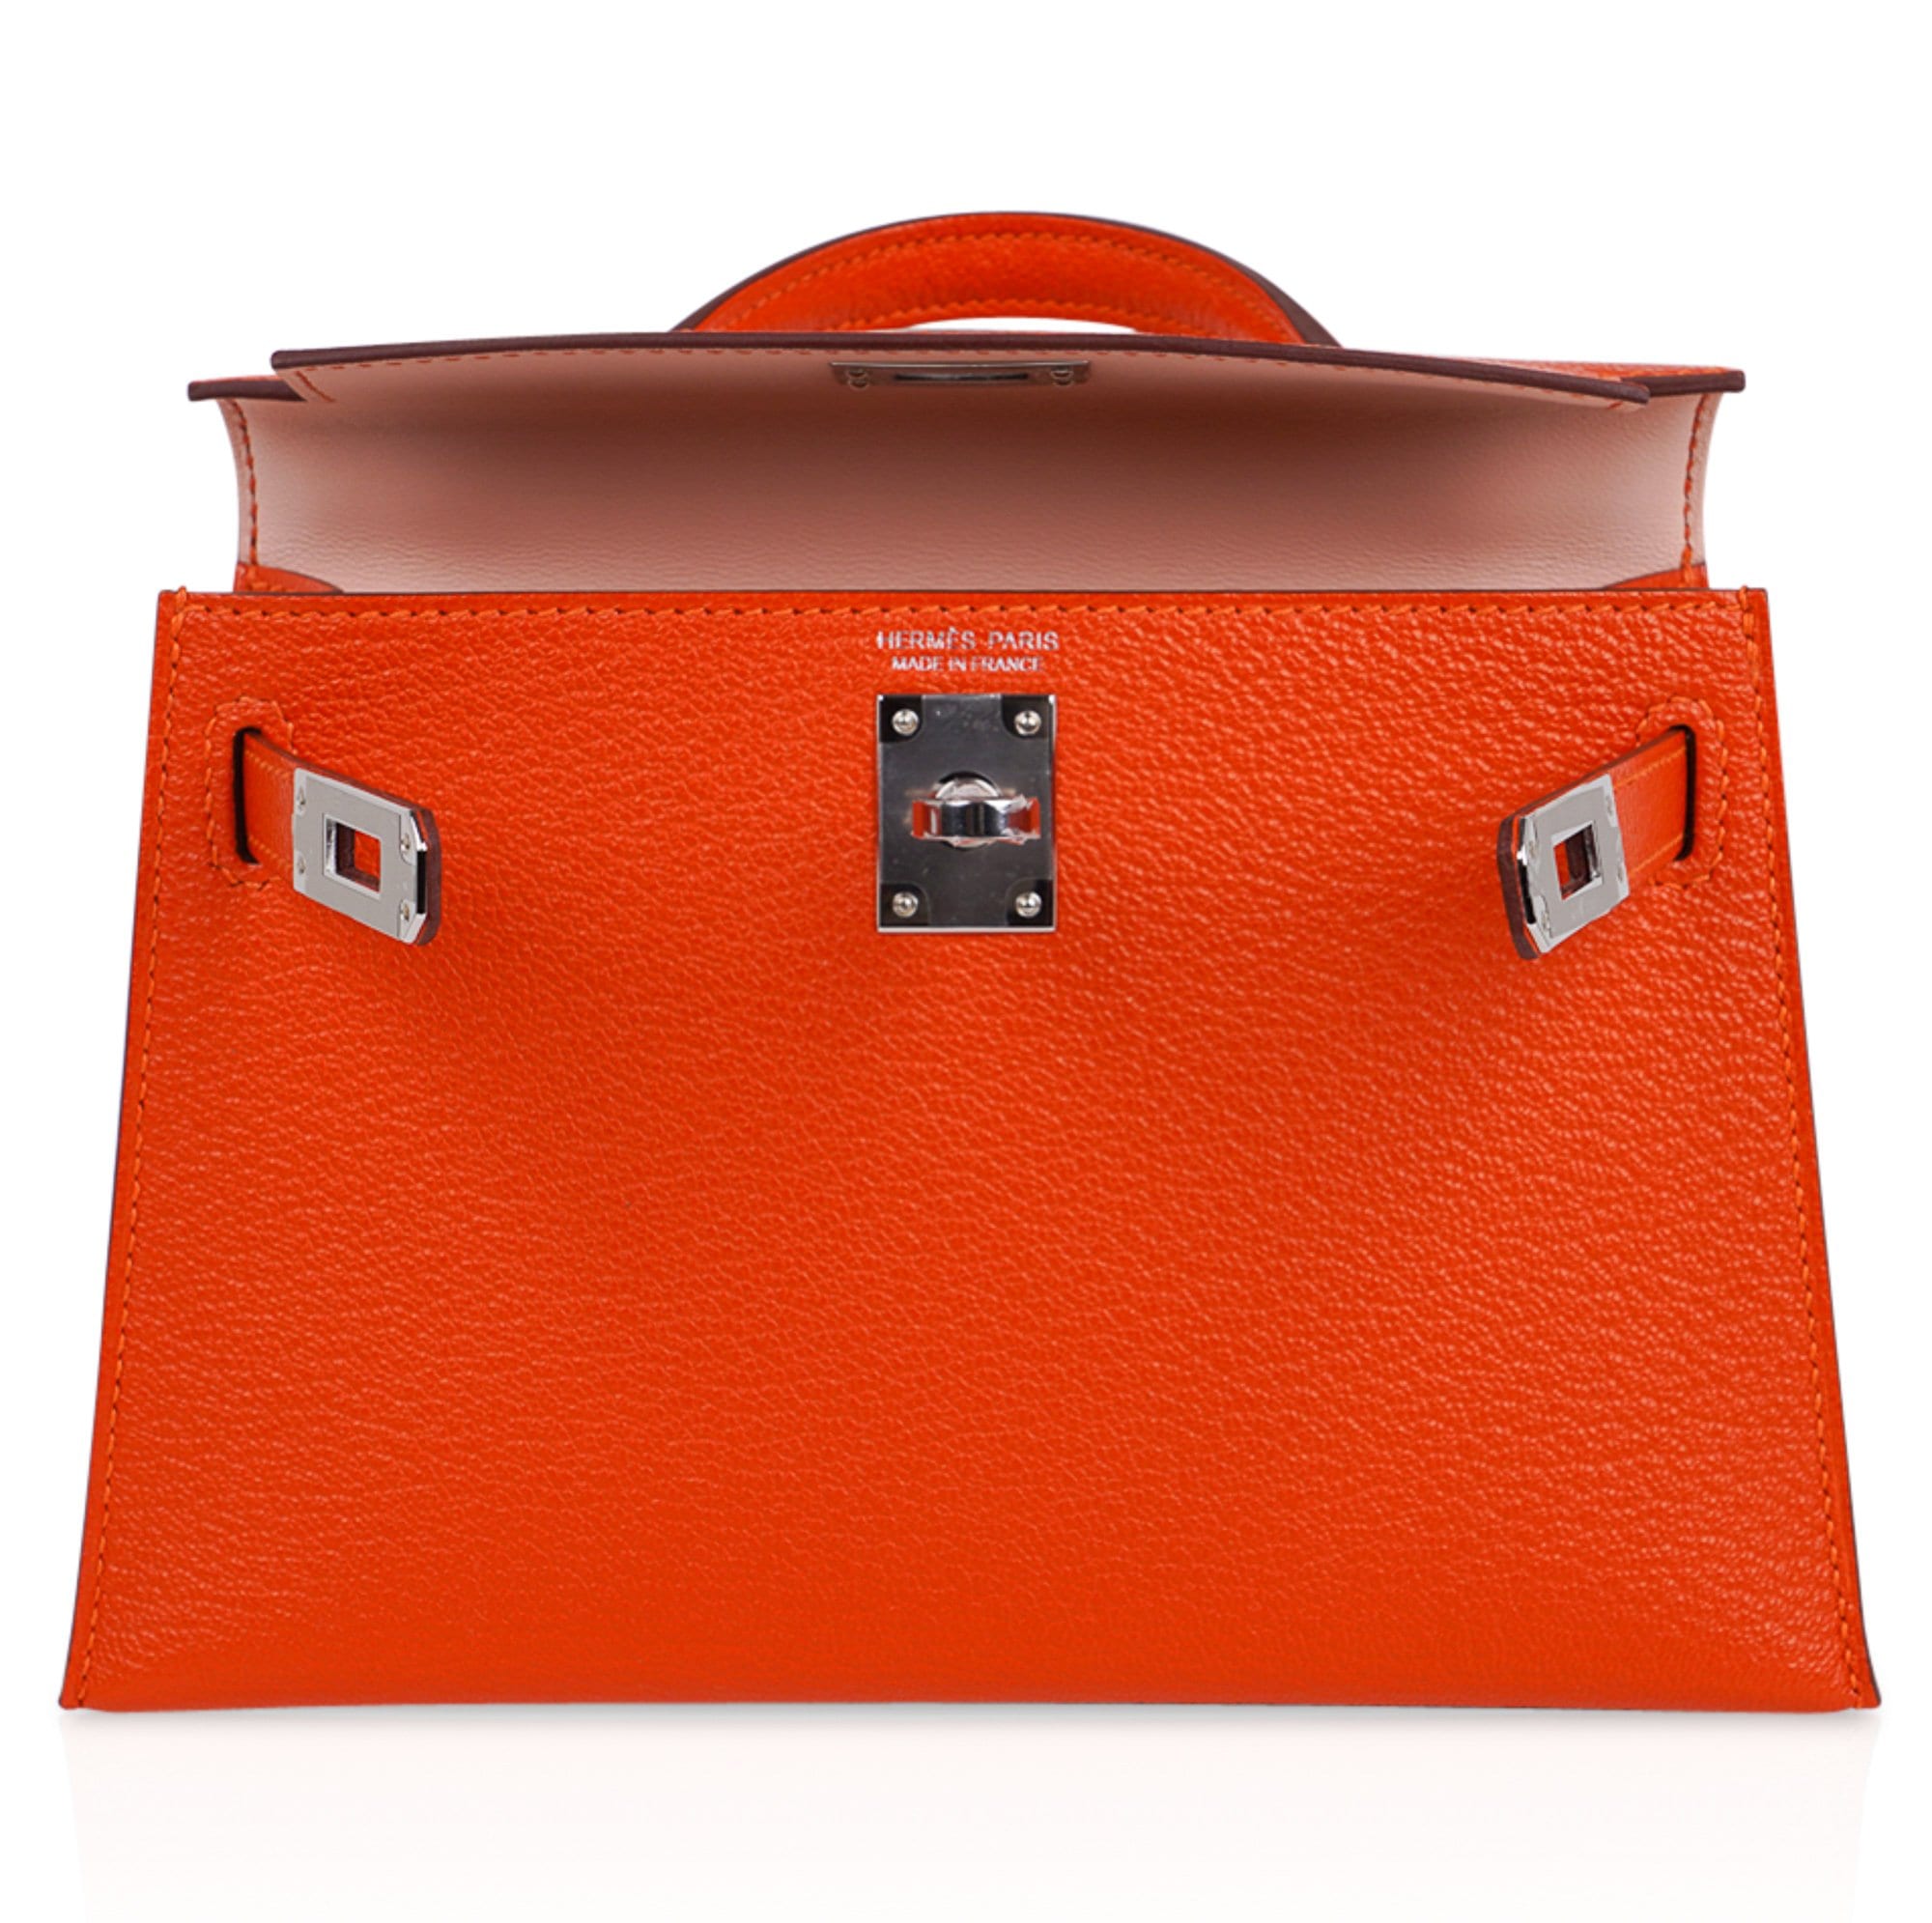 Hermes Kelly Sellier 20 Mini Rouge de Coeur Bag Chevre Leather Gold  Hardware • MIGHTYCHIC • 